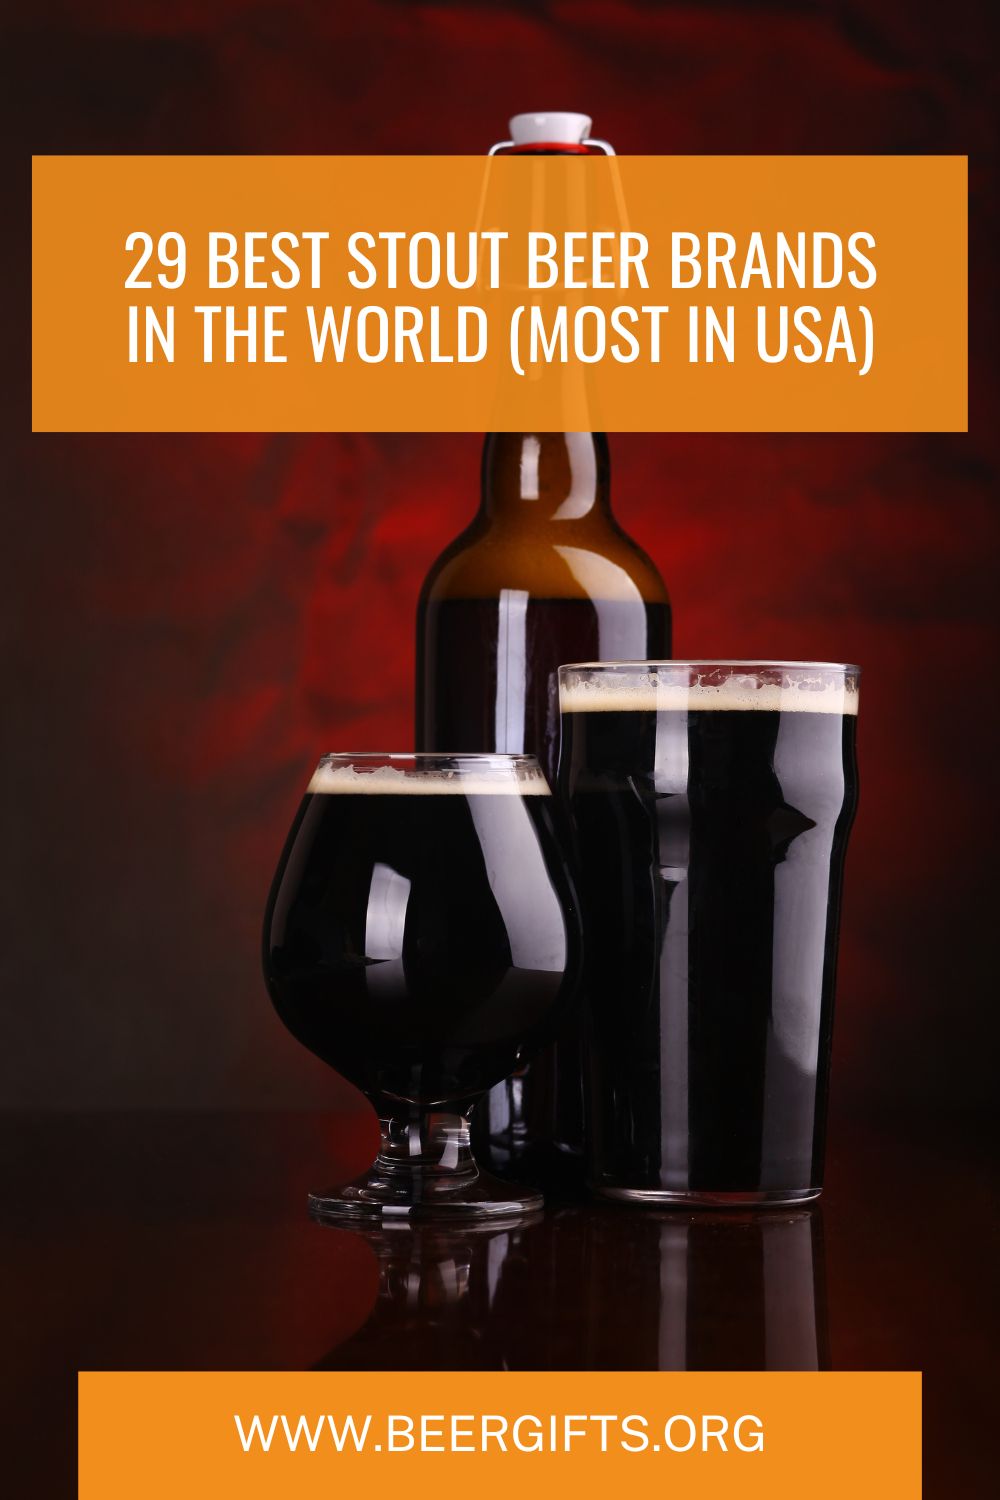 29 Best Stout Beer Brands In the World (Most In USA) 1